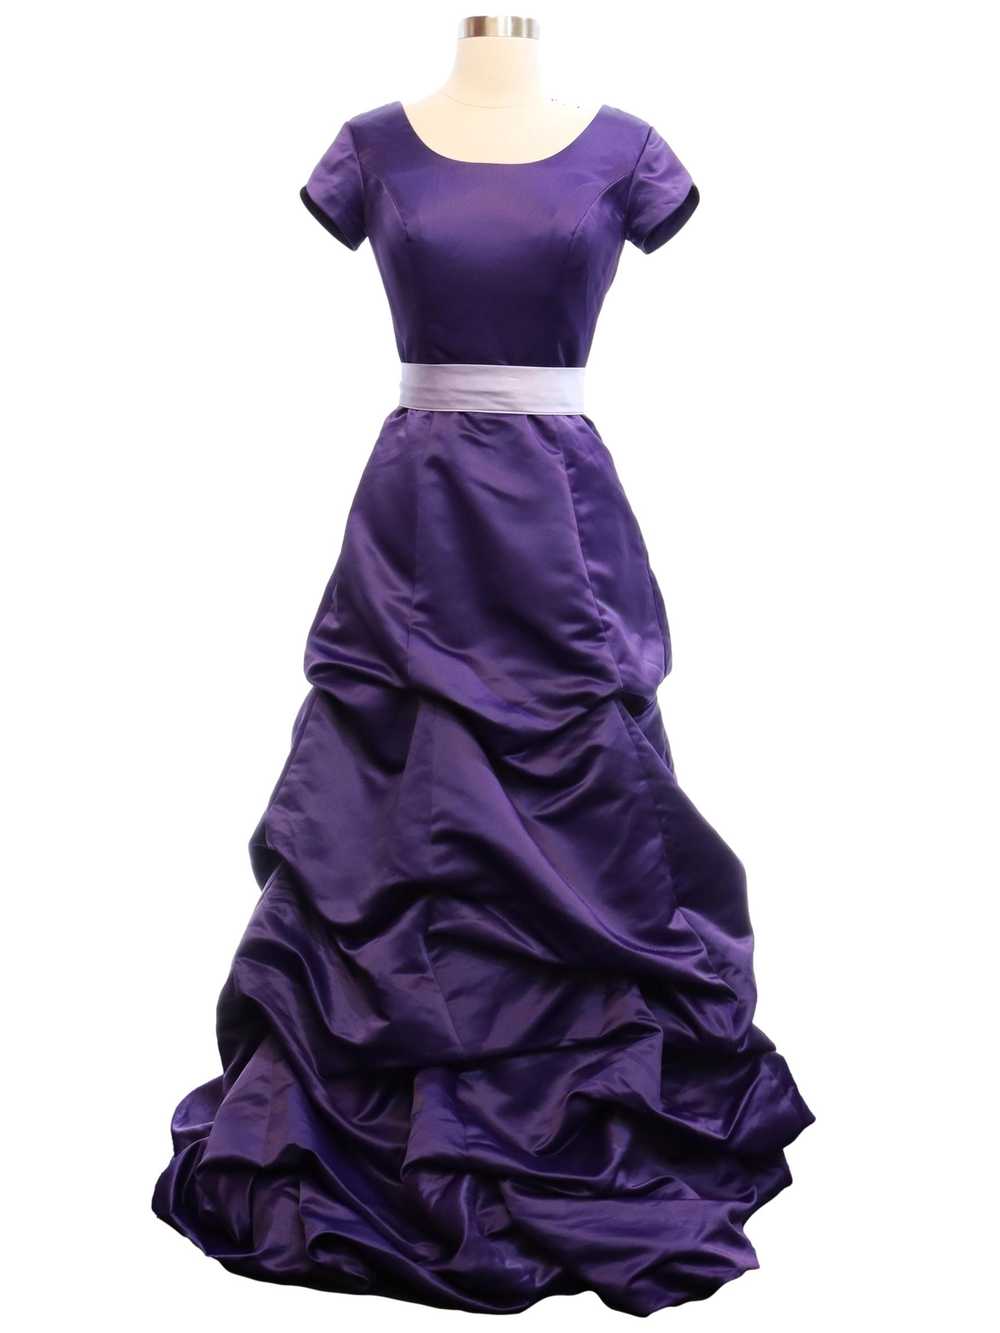 1990's Eternity Evenings Prom or Cocktail Dress - image 1